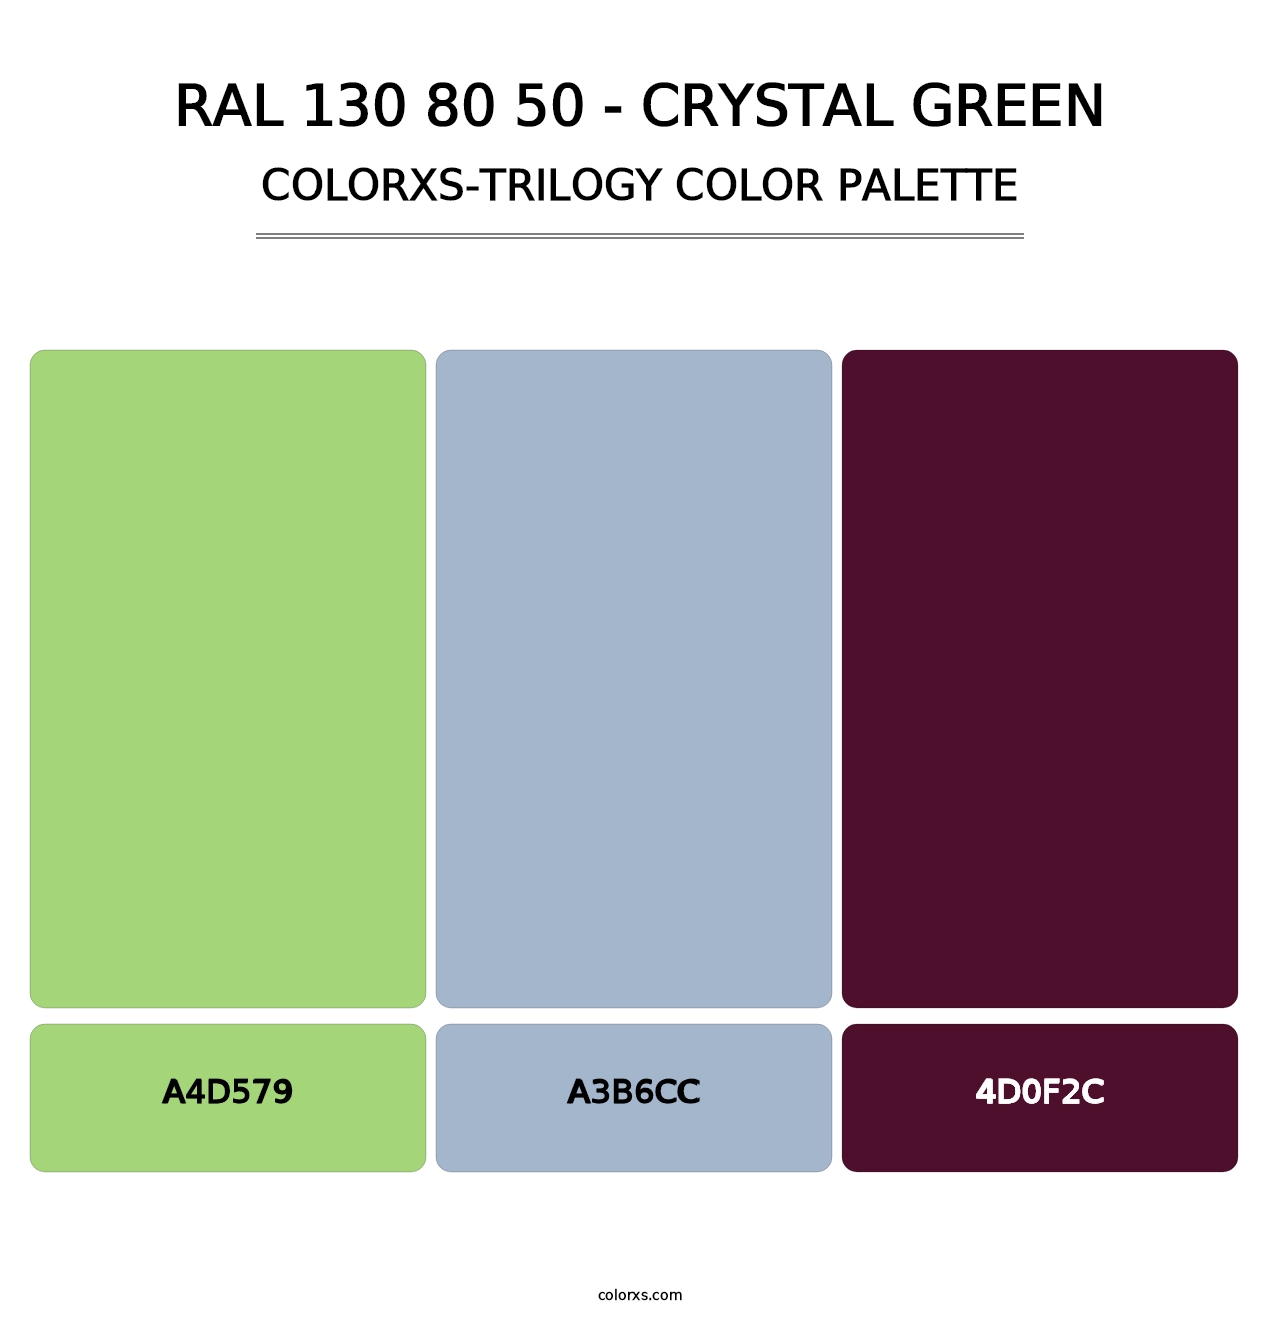 RAL 130 80 50 - Crystal Green - Colorxs Trilogy Palette